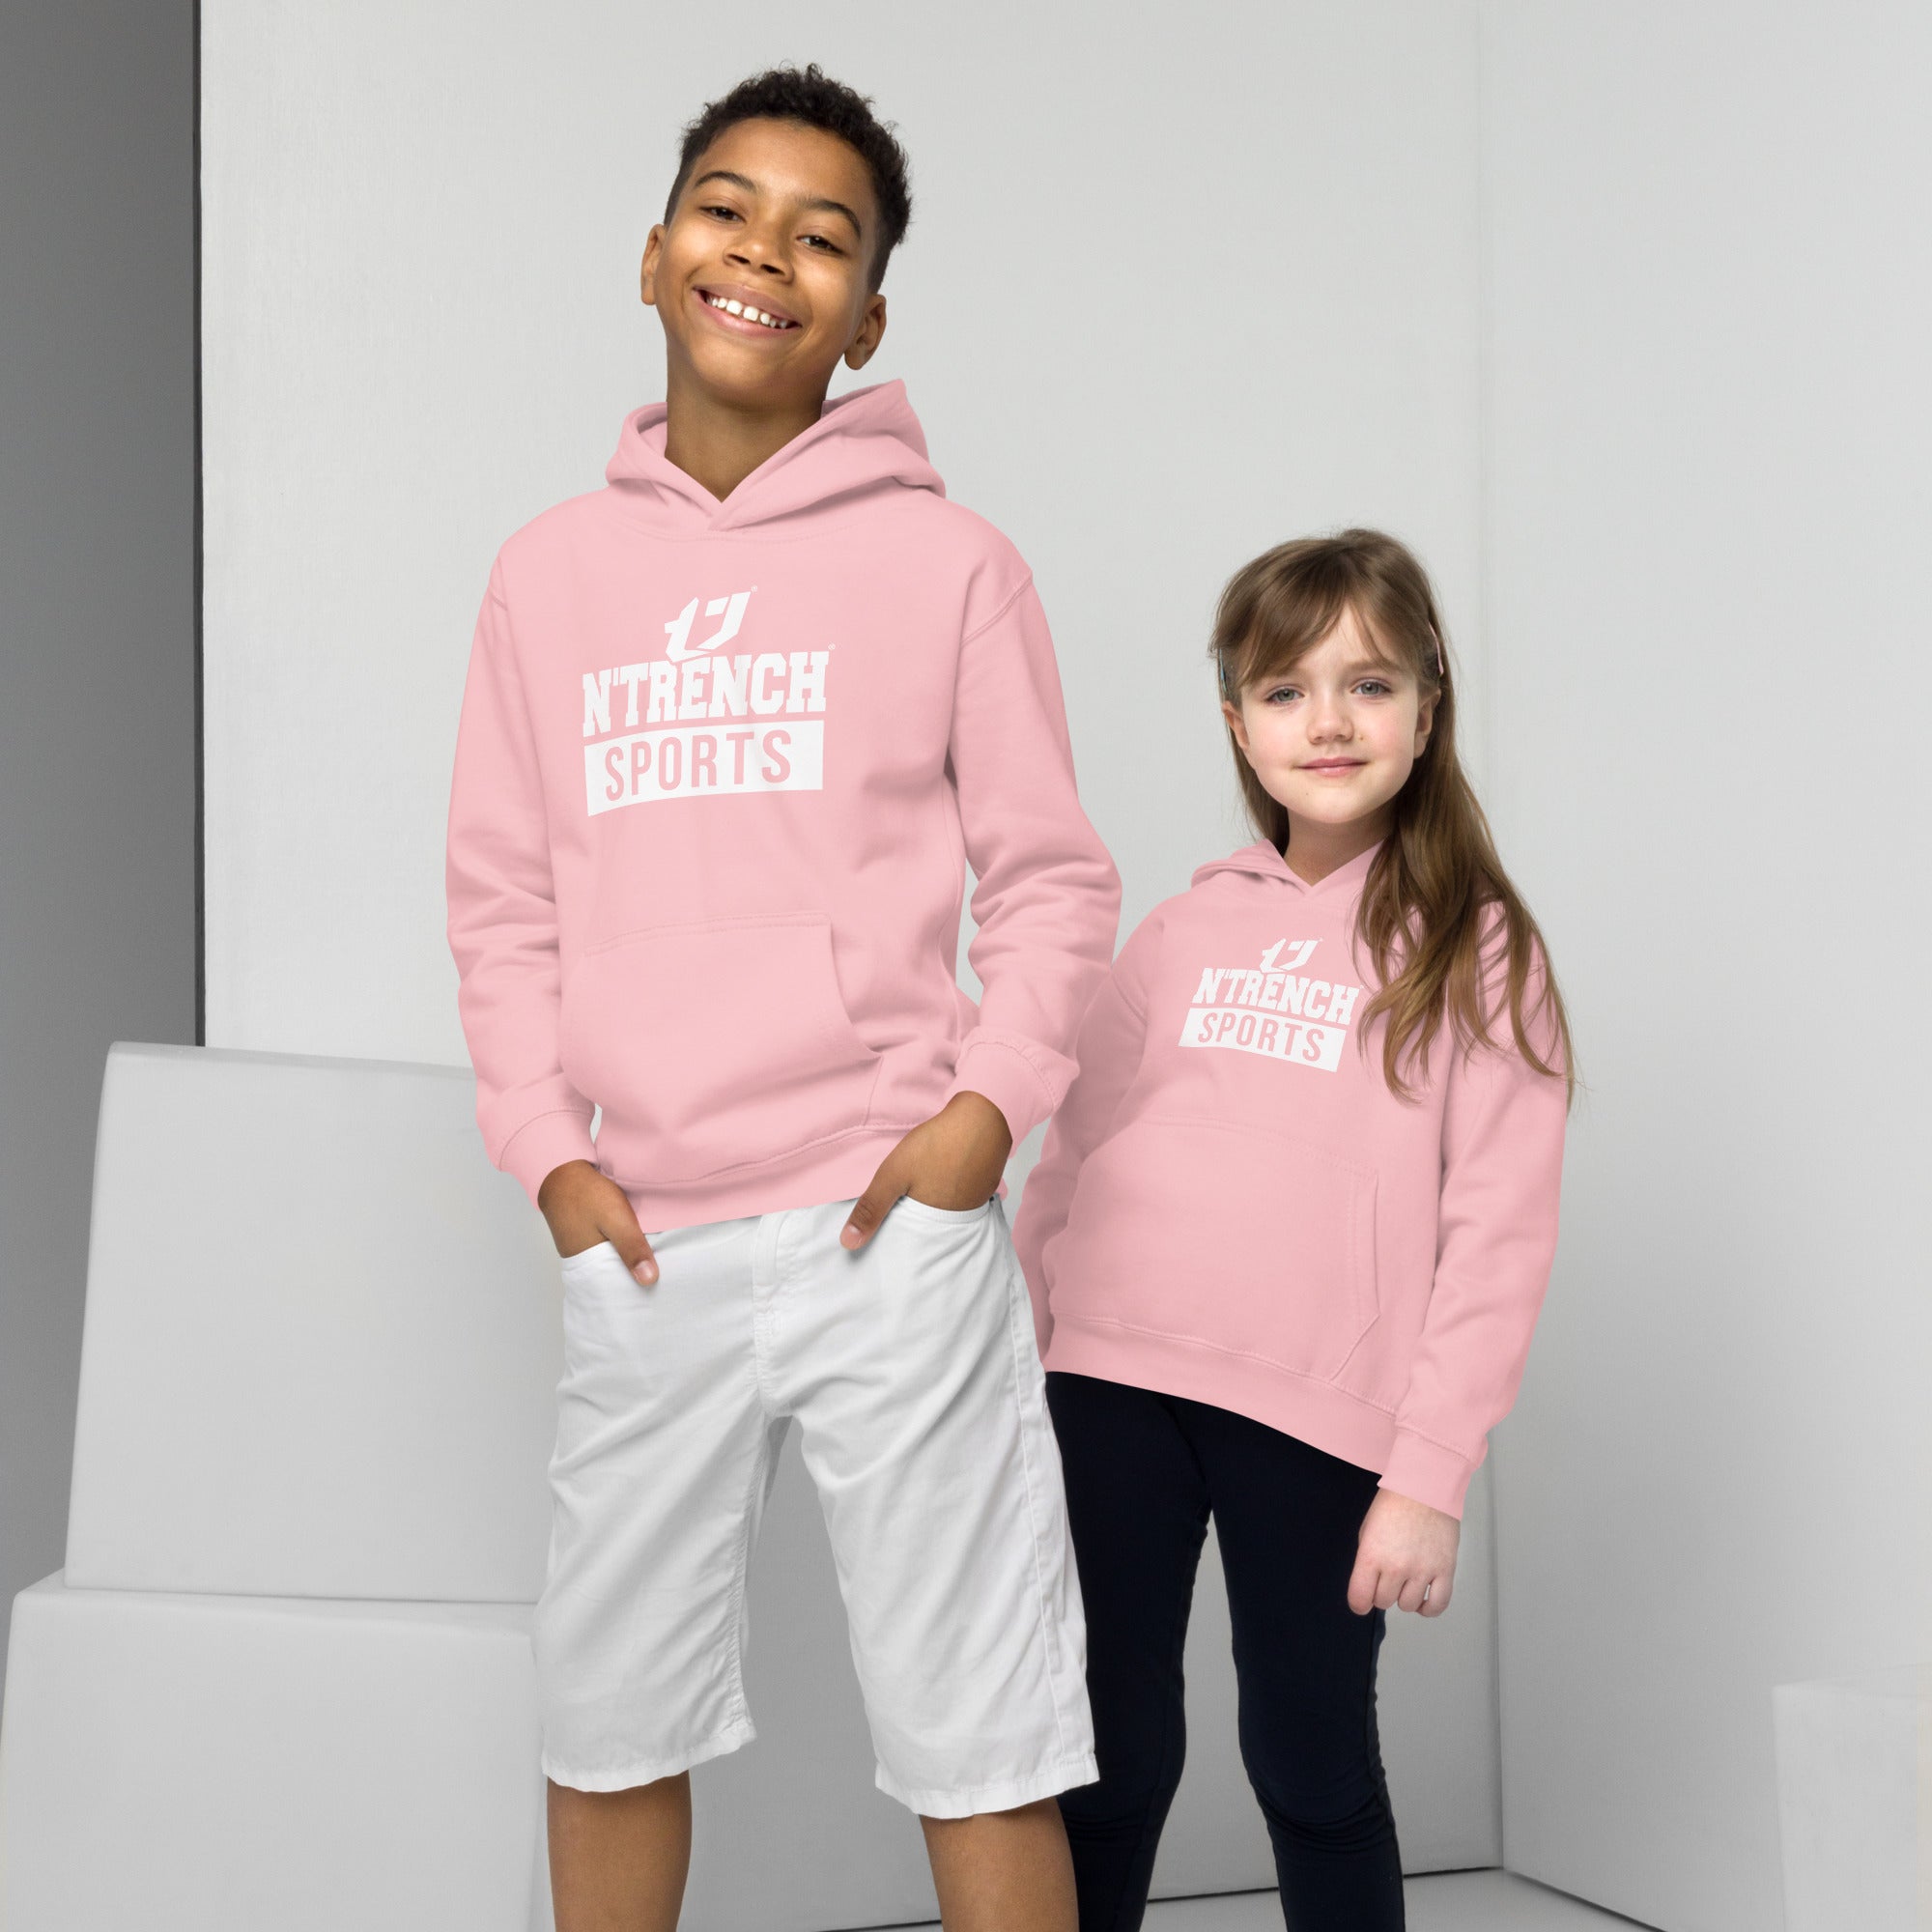 N'Trench (White Font) Kids Hoodie